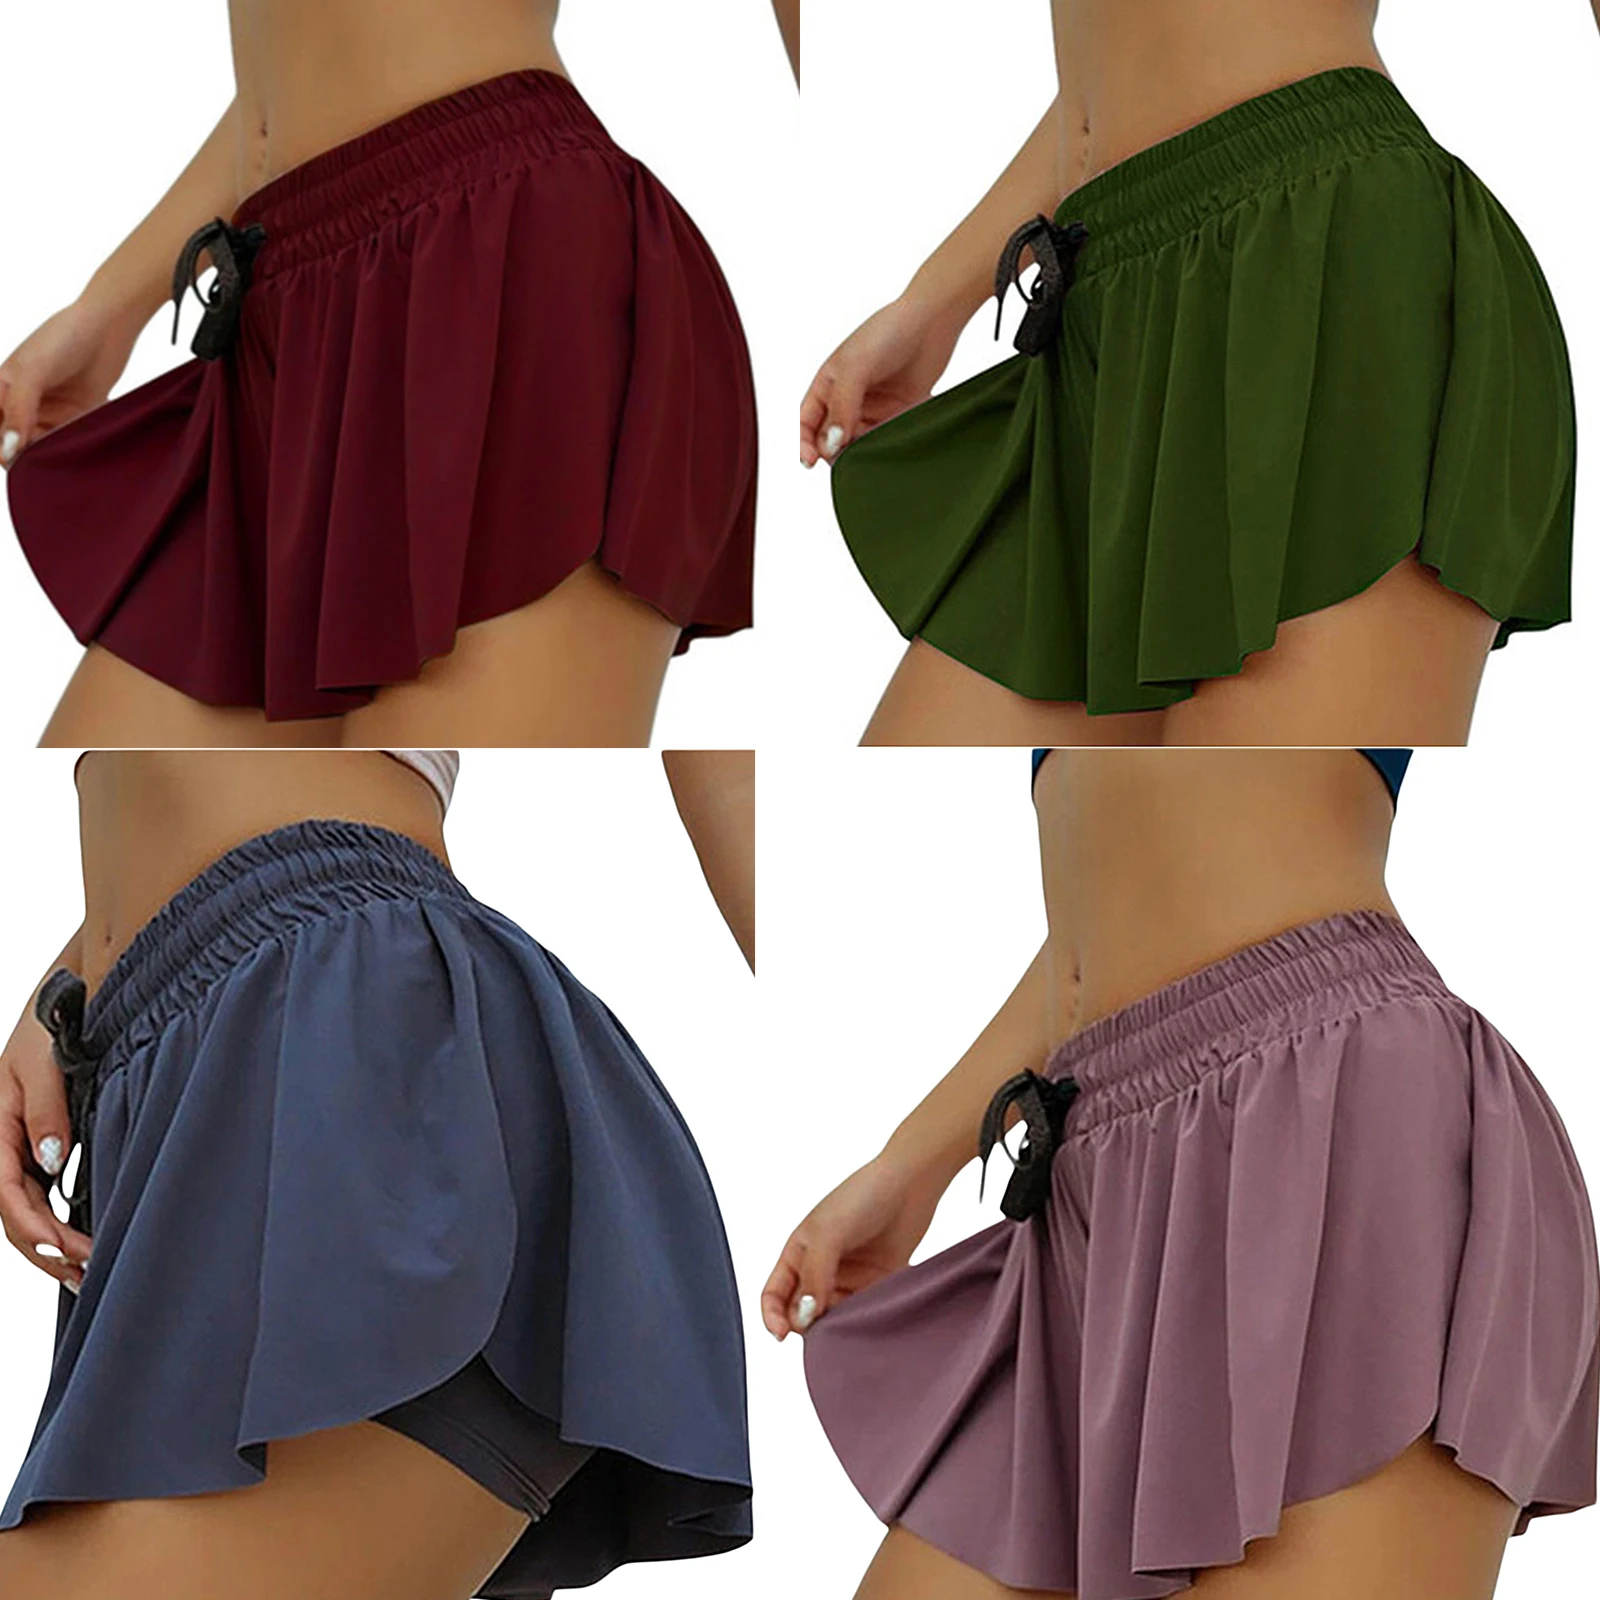 plus size womens clothing Women Simple Style Sports Skort, Female Solid Color Casual Elastic High Waist Oversize Skirt with Built-in Slip Shorts, S-XXXXXL adidas shorts